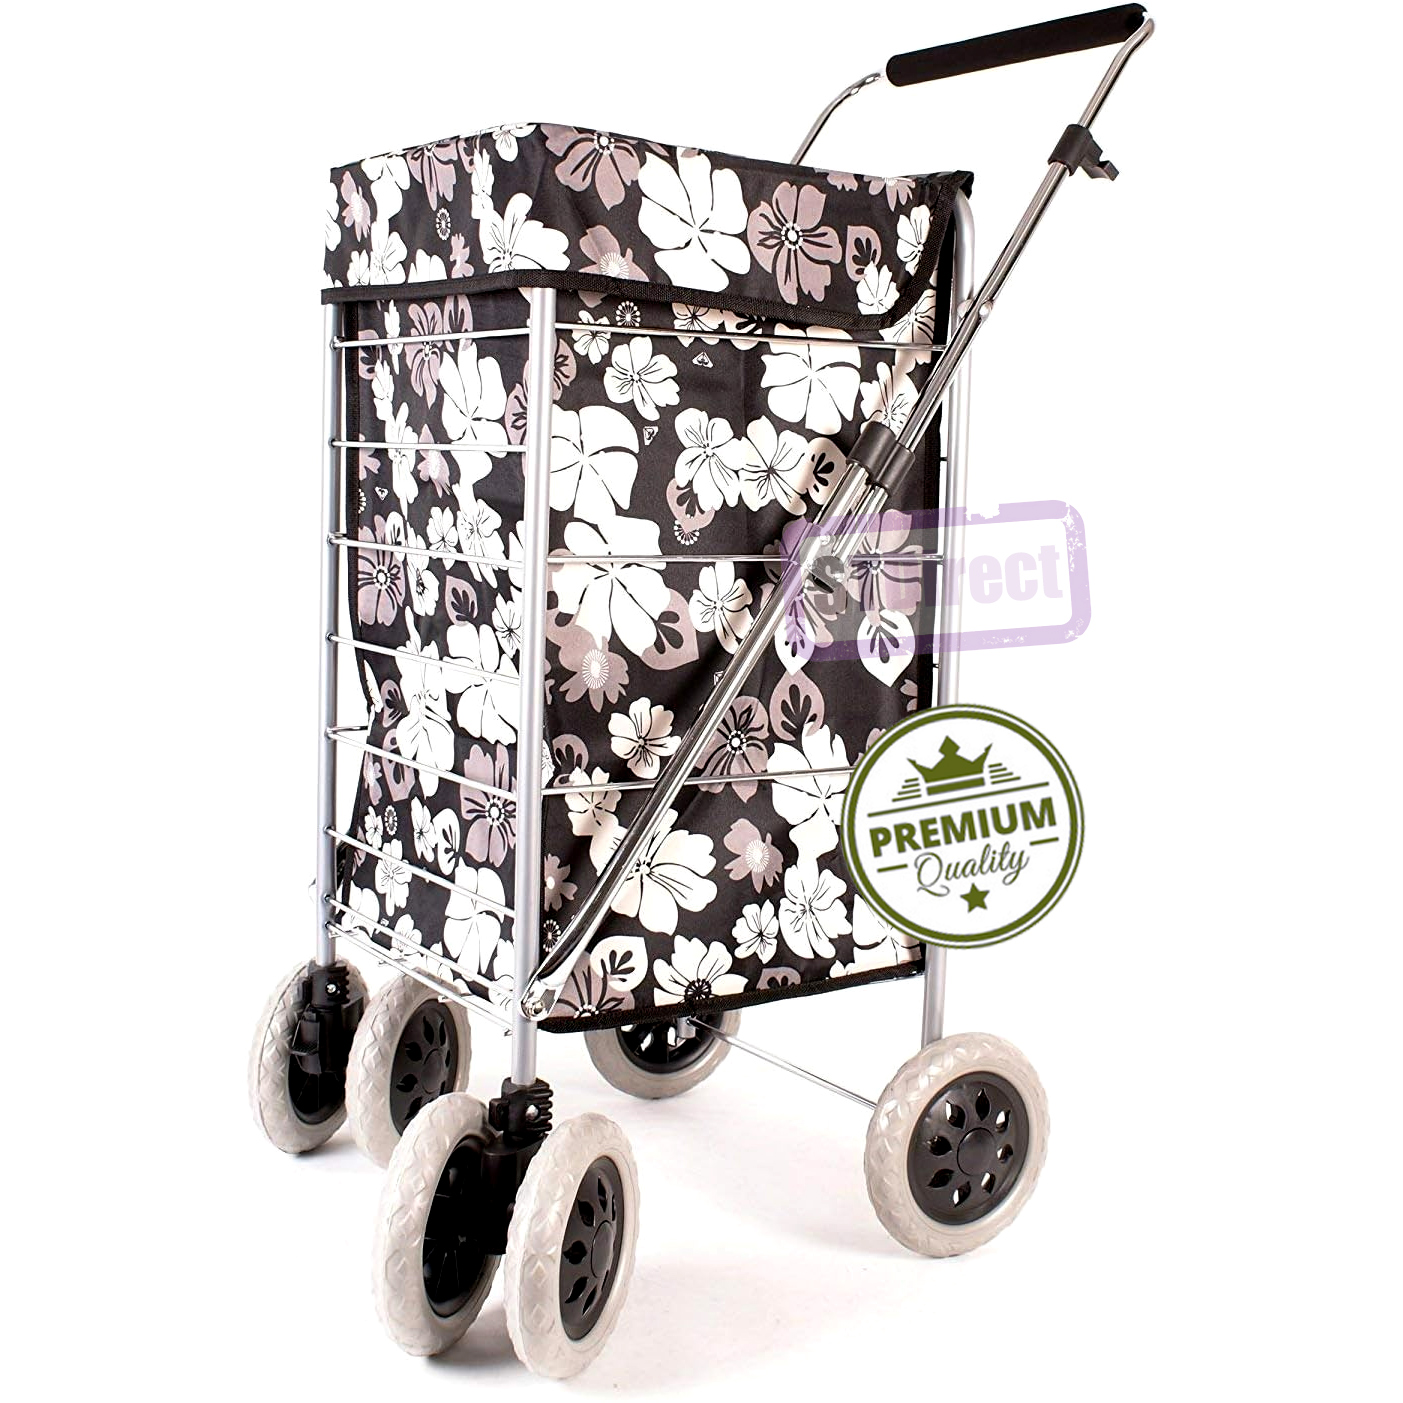 Alaska Premium 6 Wheel Swivel Shopping Trolley with Adjustable Handle Black with Grey and White Floral Print #1